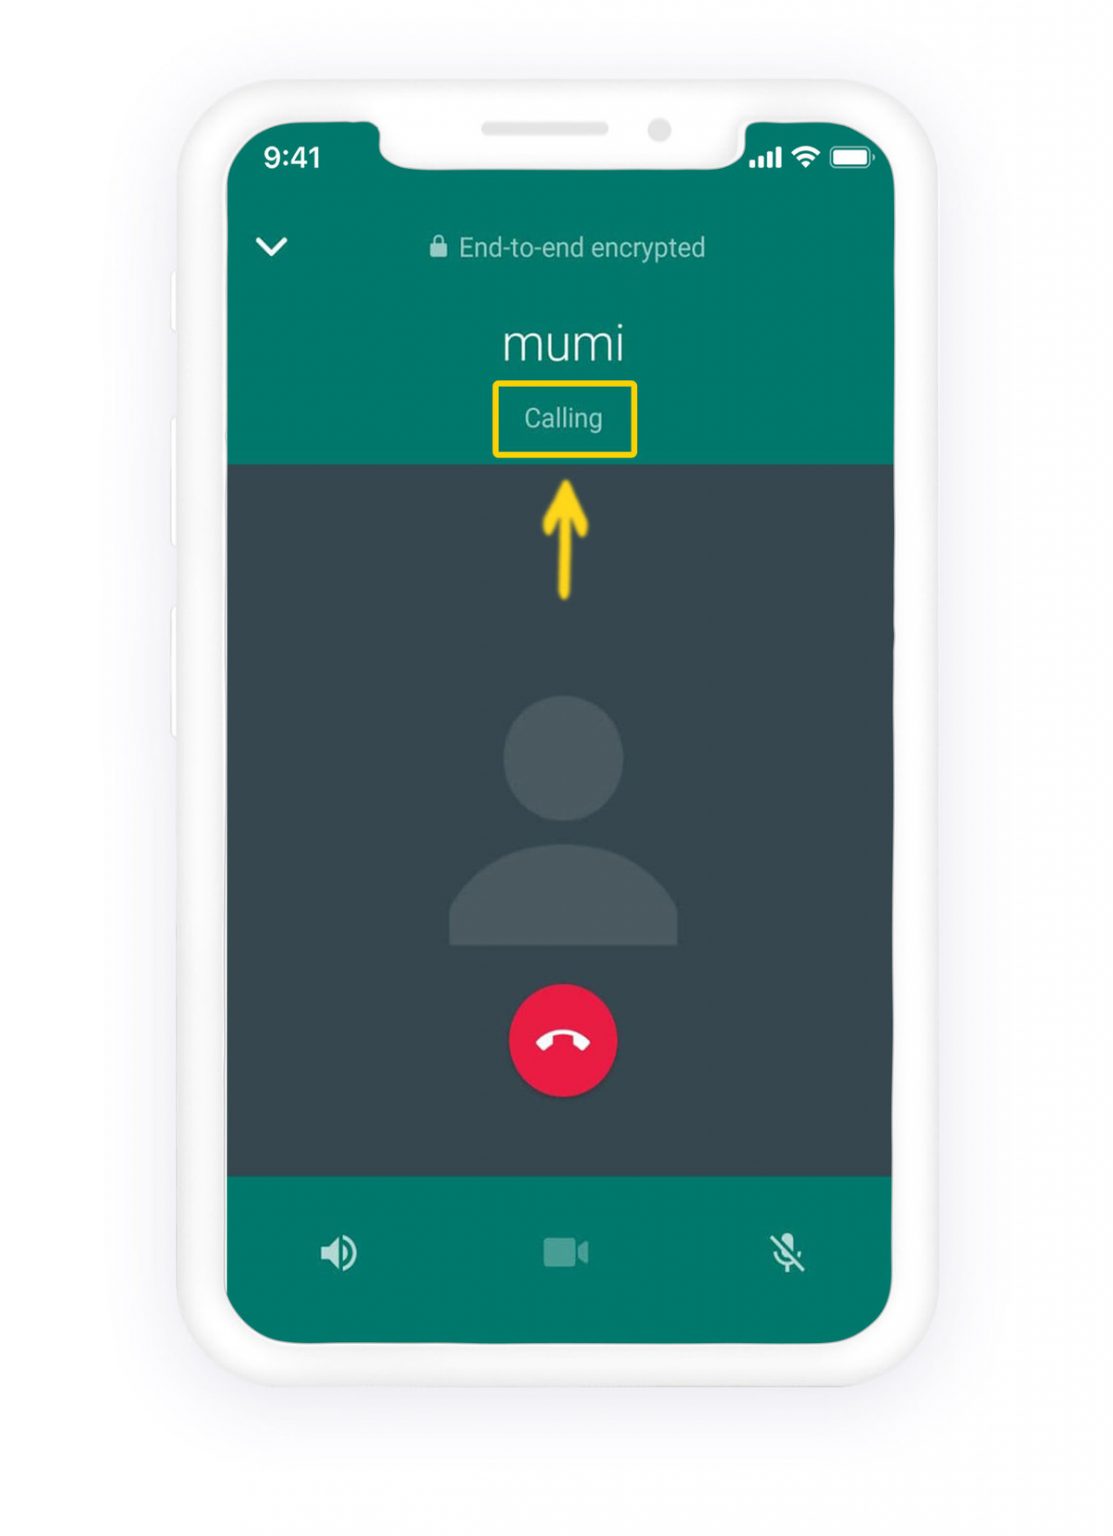 how to block someone on whatsapp calls but not messages